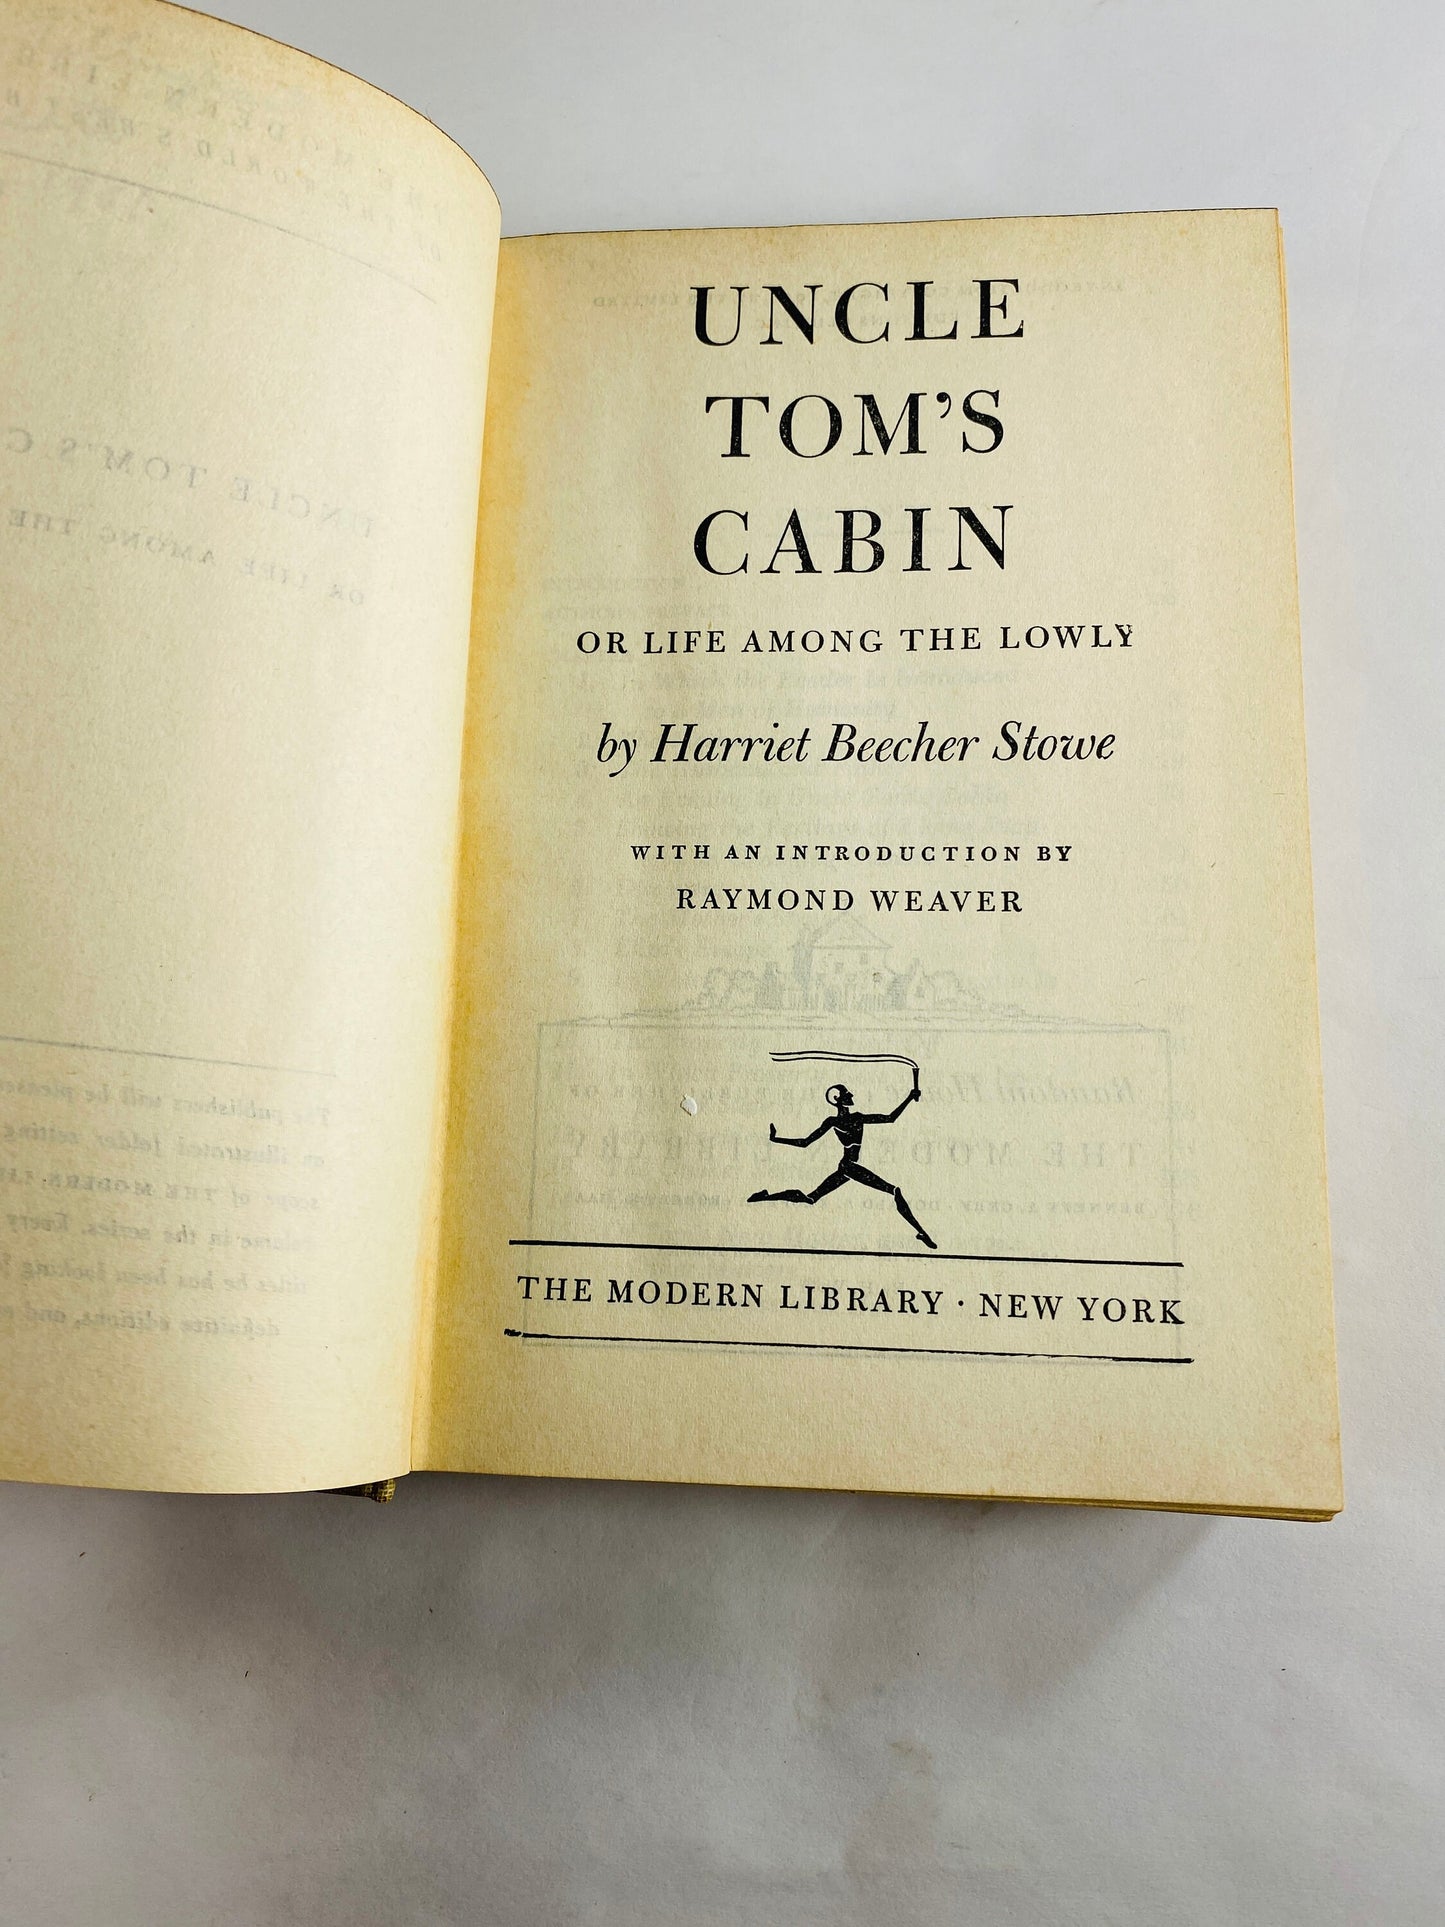 Uncle Tom's Cabin by Harriet Beecher Stowe Life Among the Lowly vintage Modern Library book Anti-slavery book circa 1938 Civil War